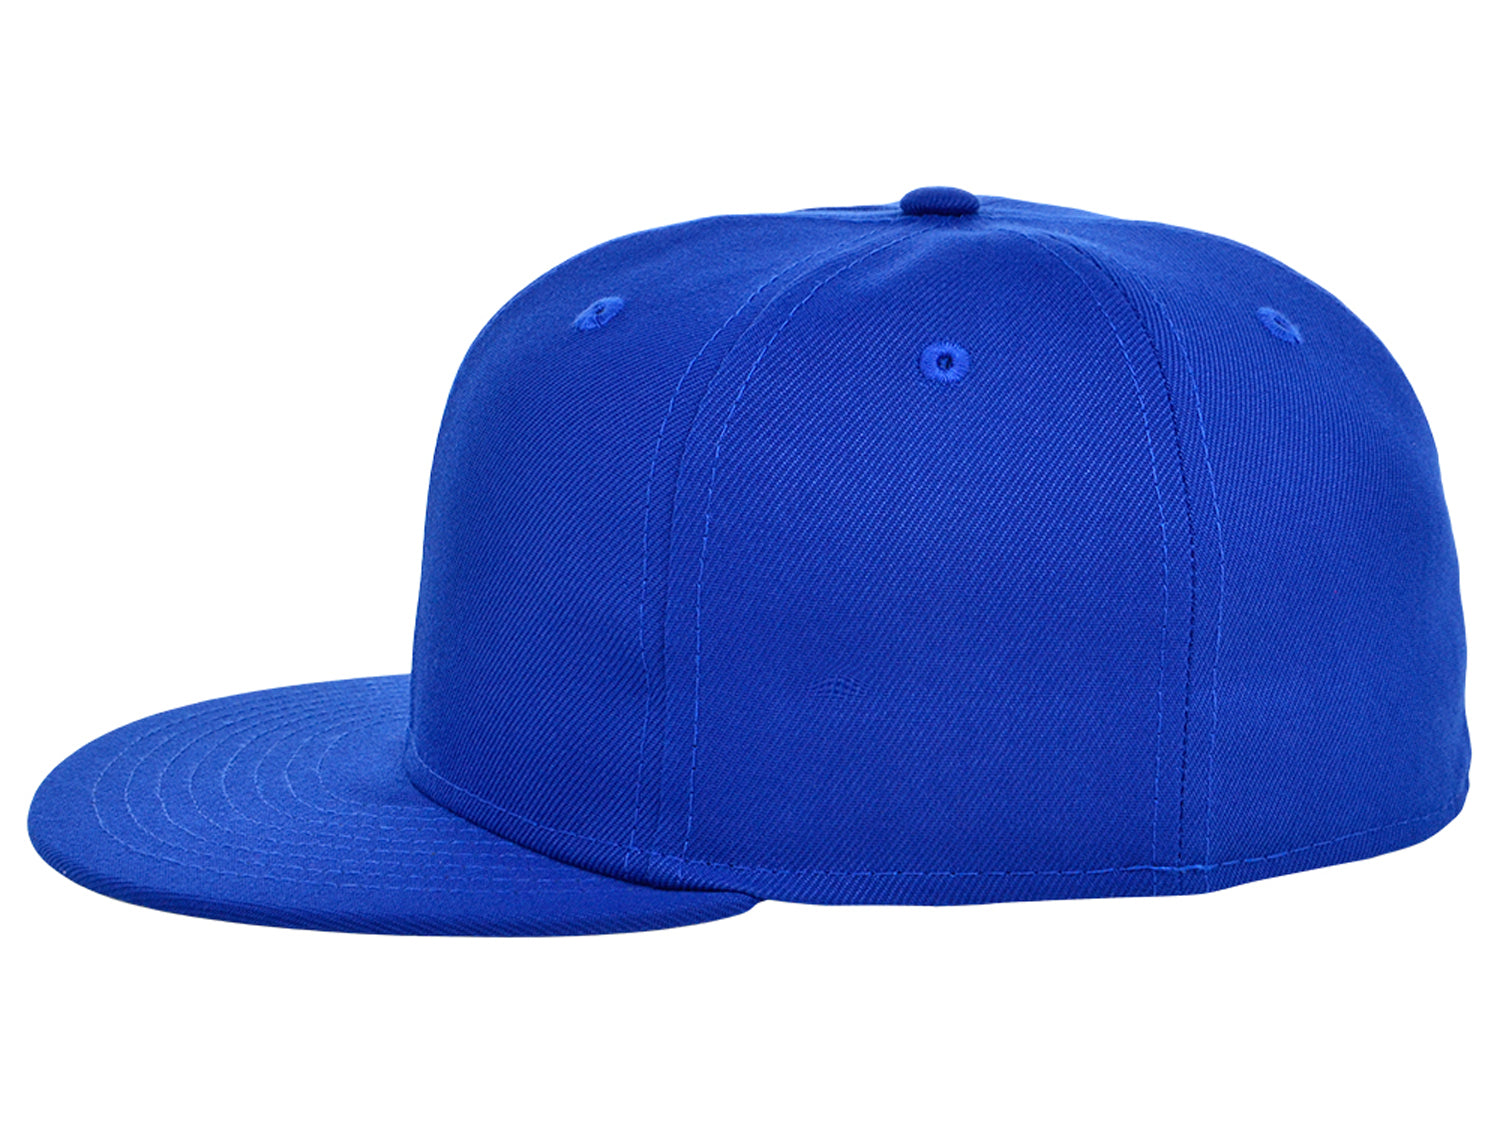 Crowns by Lids Full Court Fitted Cap - Red